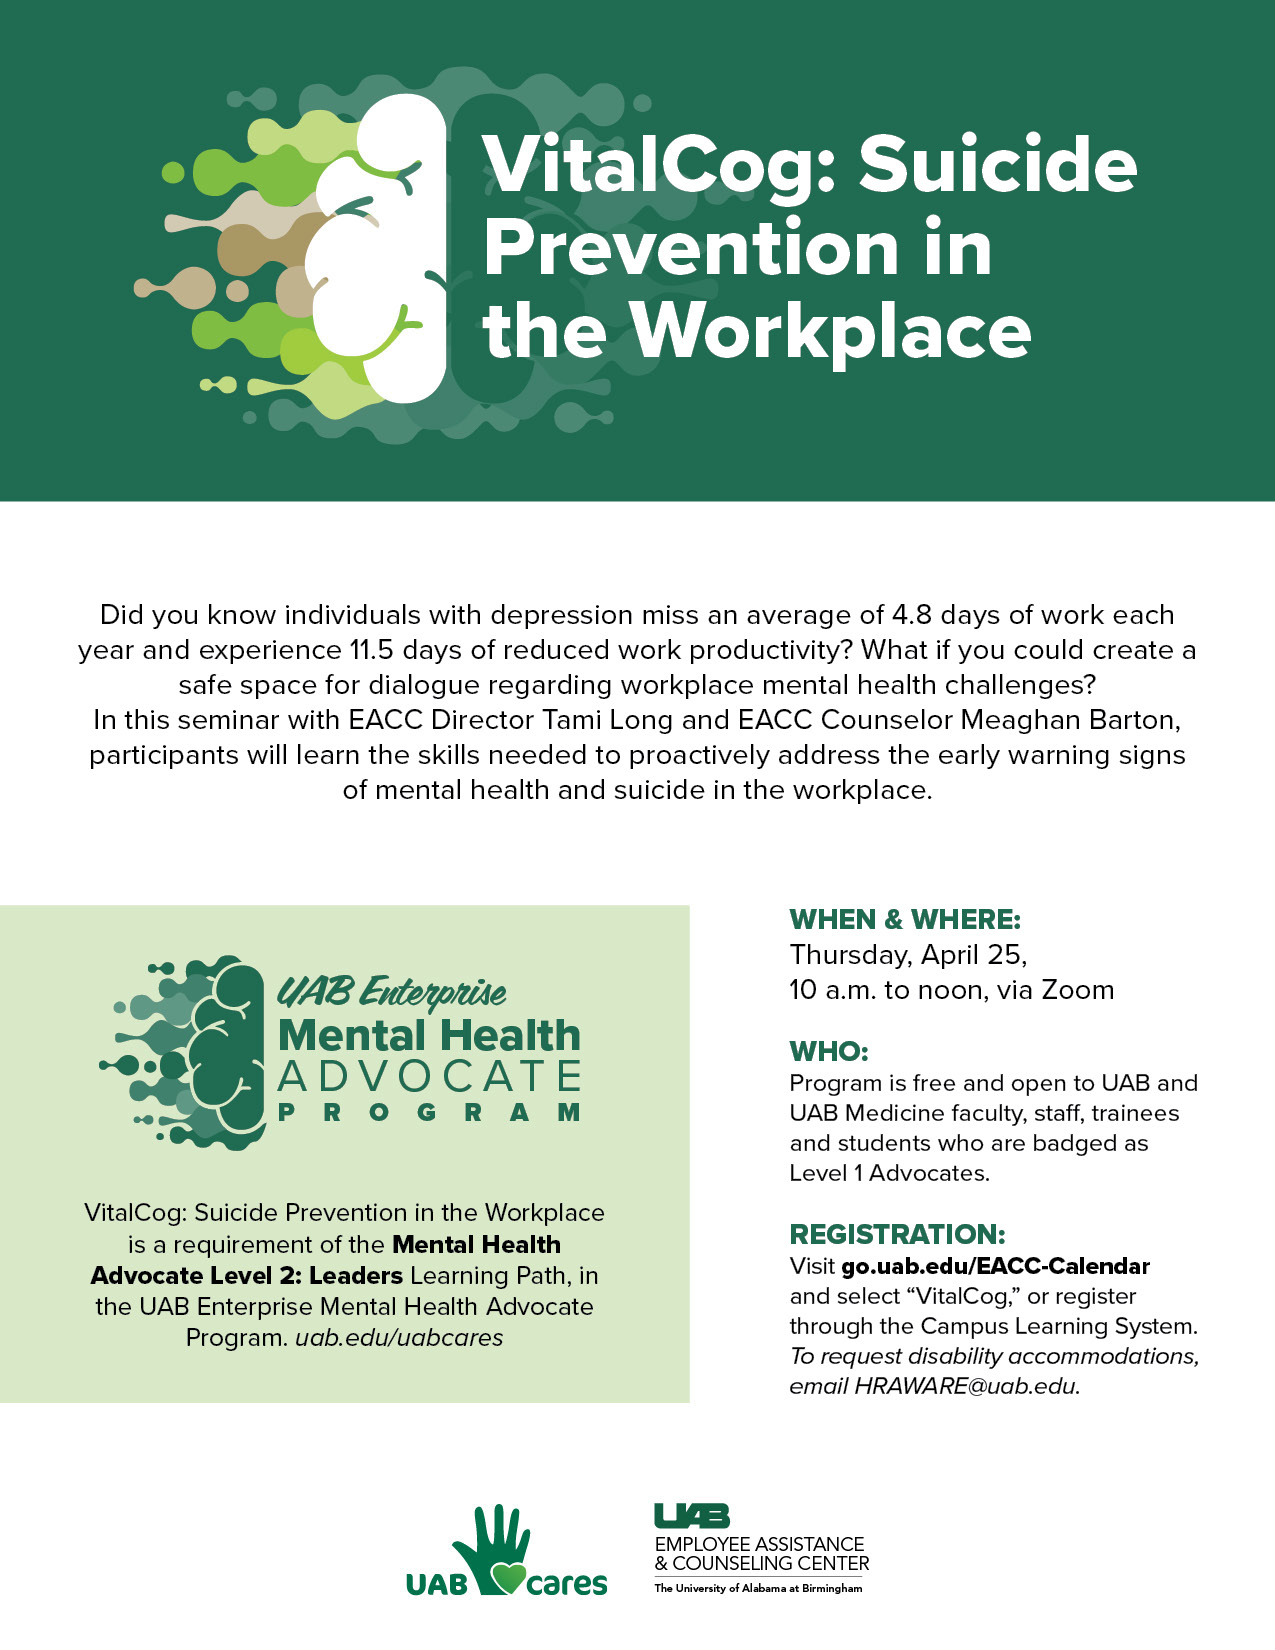 VitalCog: Suicide Prevention in the Workplace